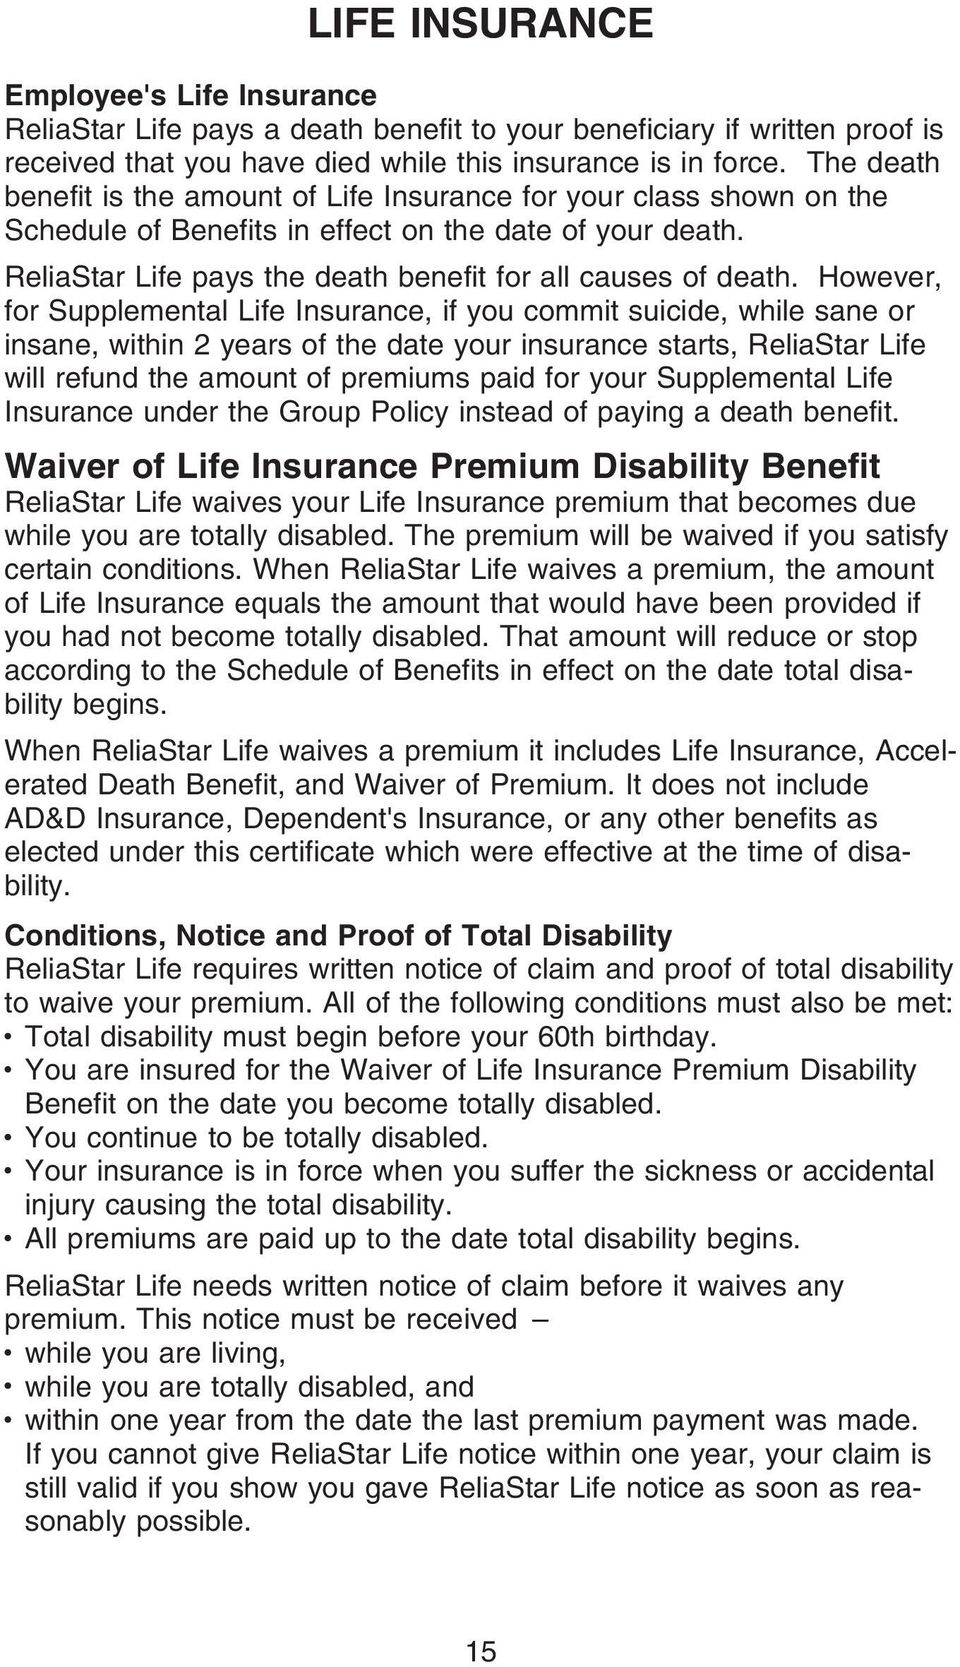 However, for Supplemental Life Insurance, if you commit suicide, while sane or insane, within 2 years of the date your insurance starts, ReliaStar Life will refund the amount of premiums paid for